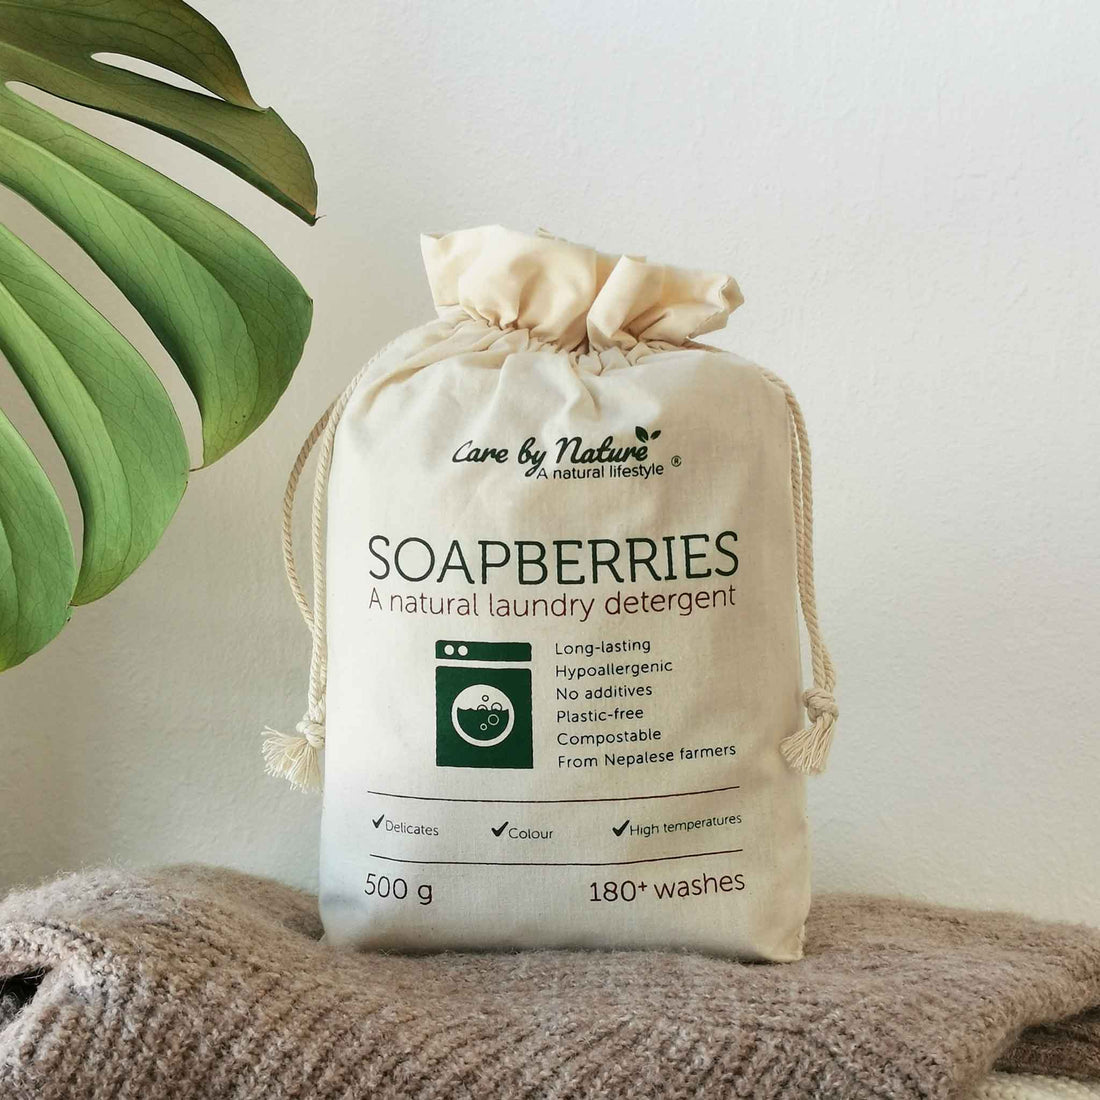 soapberries from care by nature natural laundry detergent from soap nuts